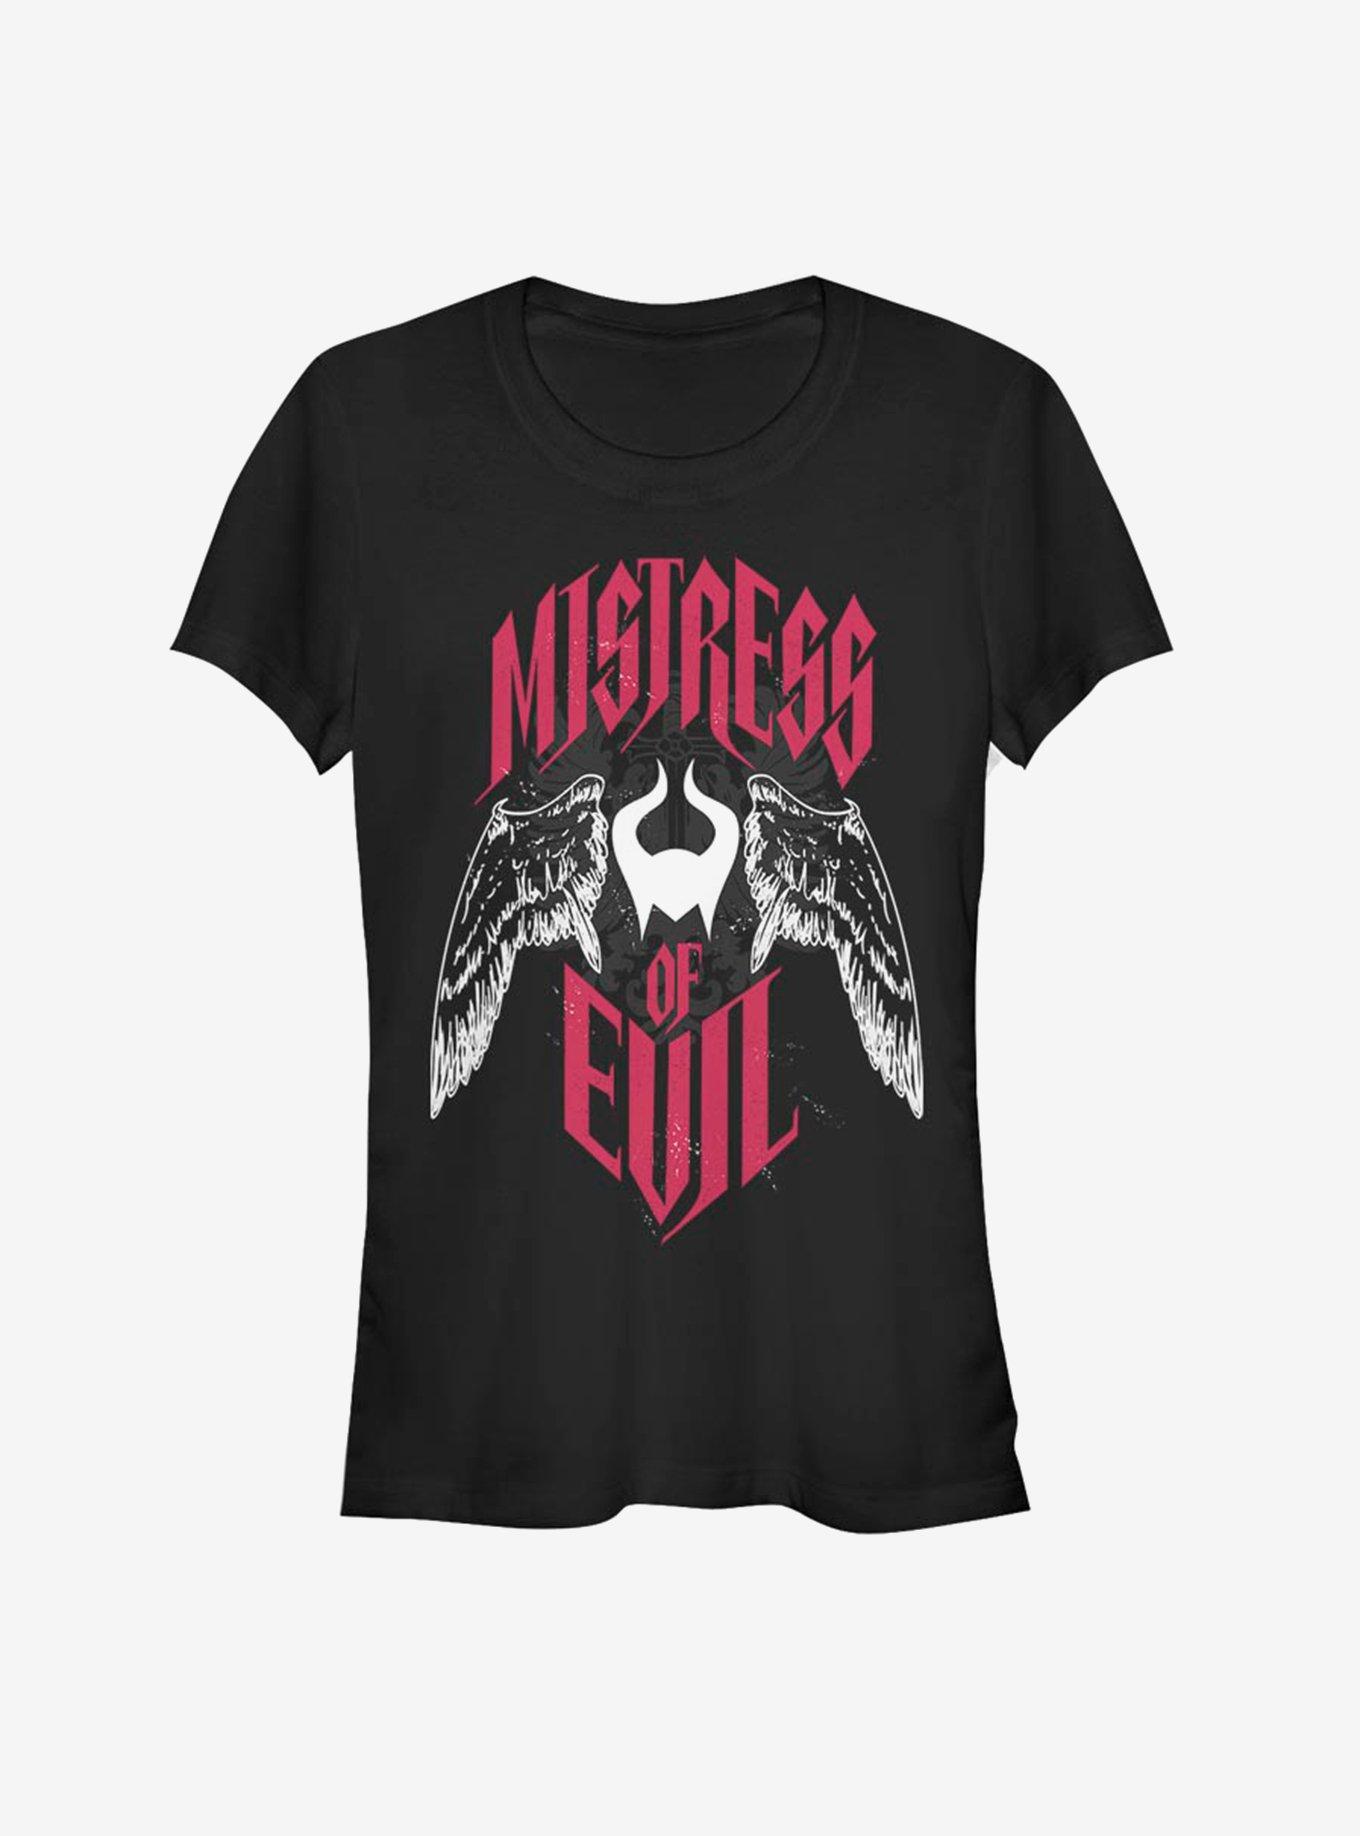 Disney Maleficent: Mistress of Evil With Wings Girls T-Shirt, BLACK, hi-res